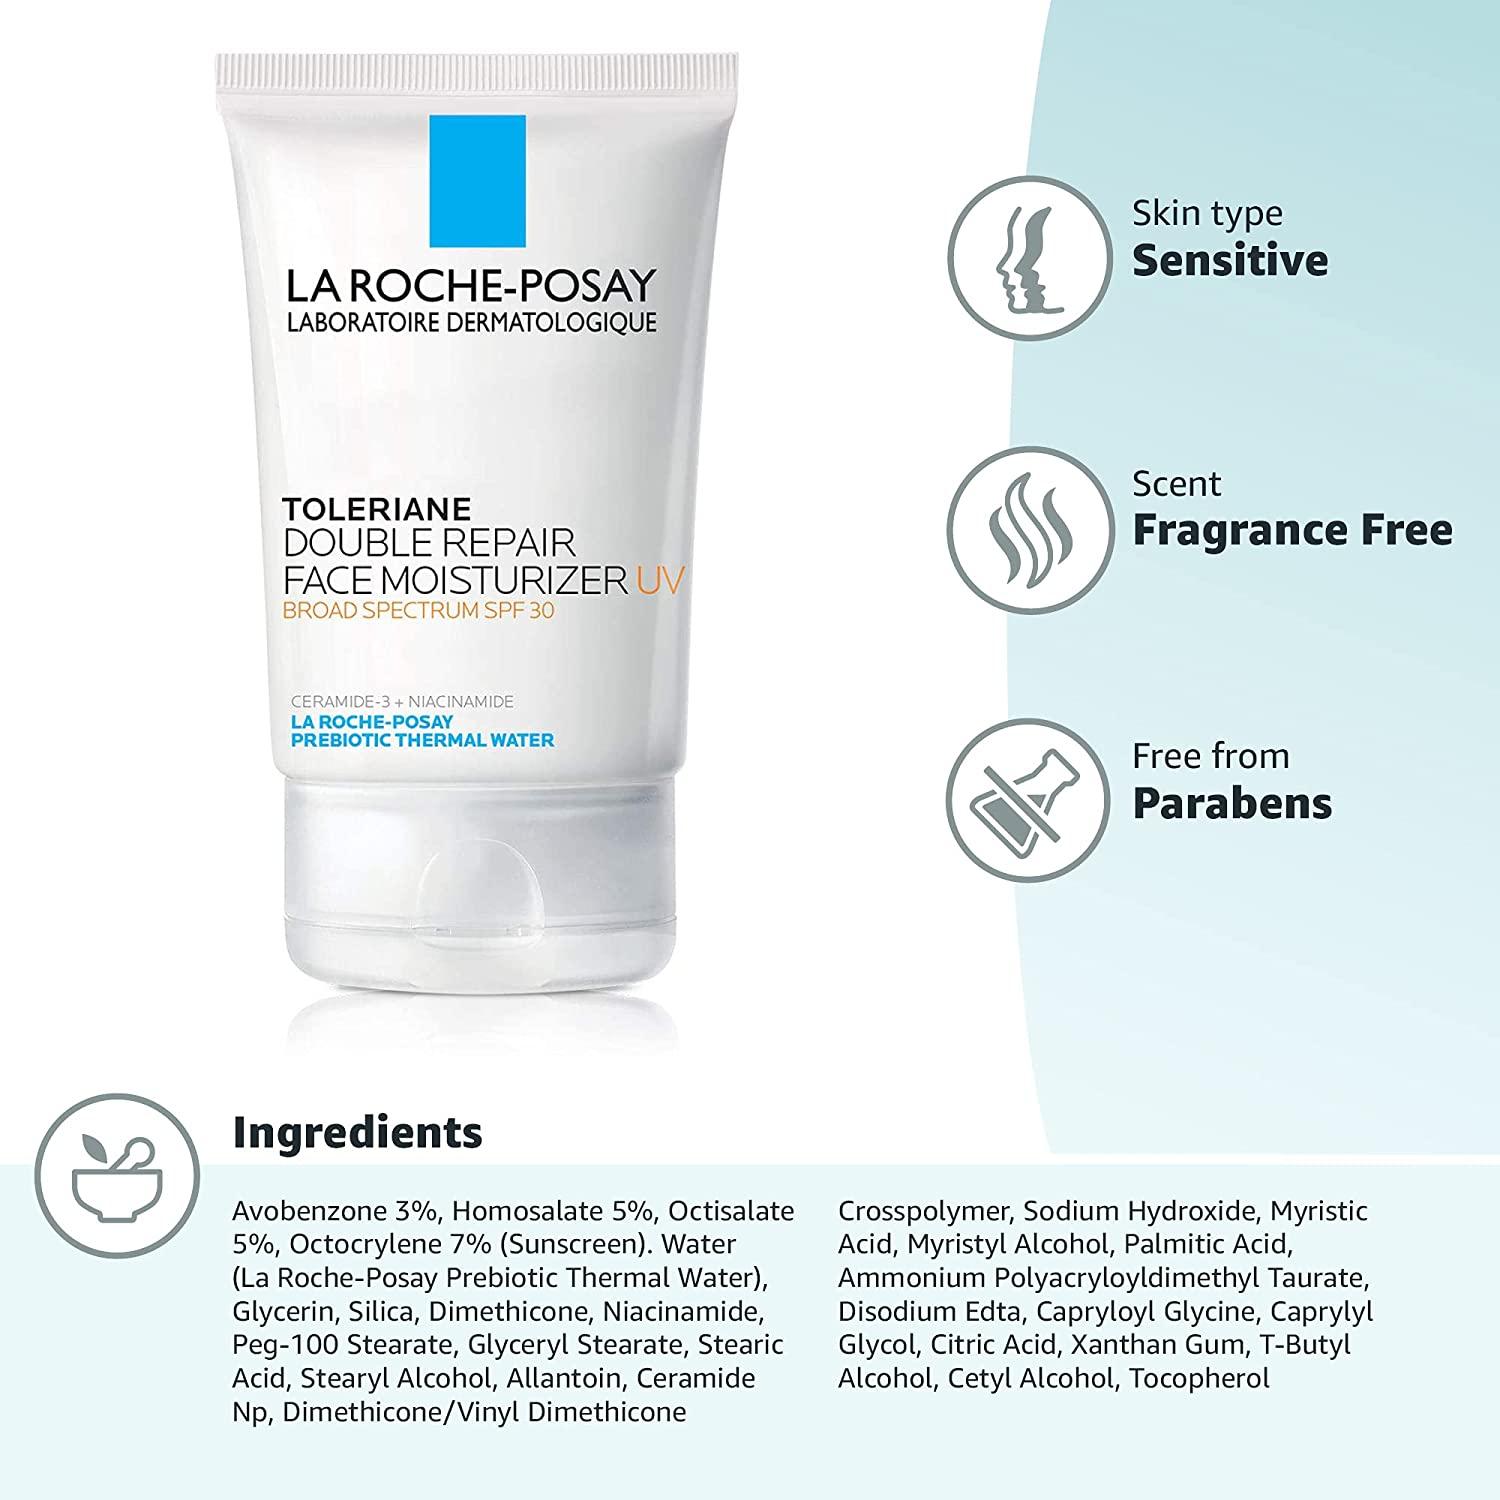 La Toleriane Double Repair UV SPF Moisturizer for Face, Daily Facial Moisturizer with Sunscreen SPF 30, Niacinamide and Glycerin, Oil Free, Moisturizing Sun Protection